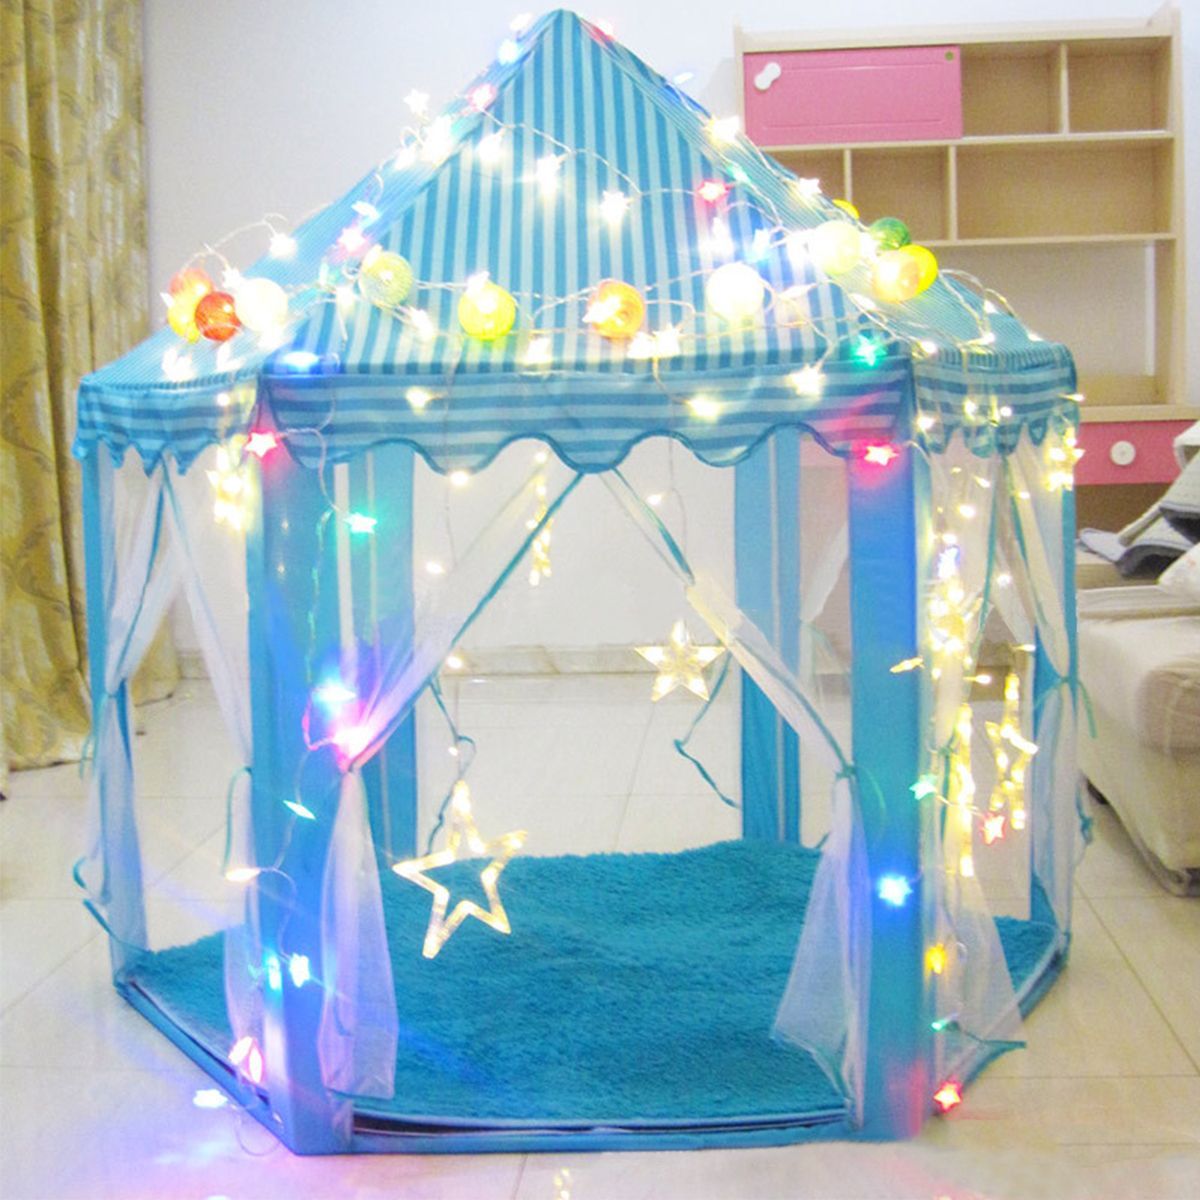 Children-Pop-Up-Play-Tent-Princess-Playhouse-Party-Christma-Gift-Decorations-LED-Light-1574109